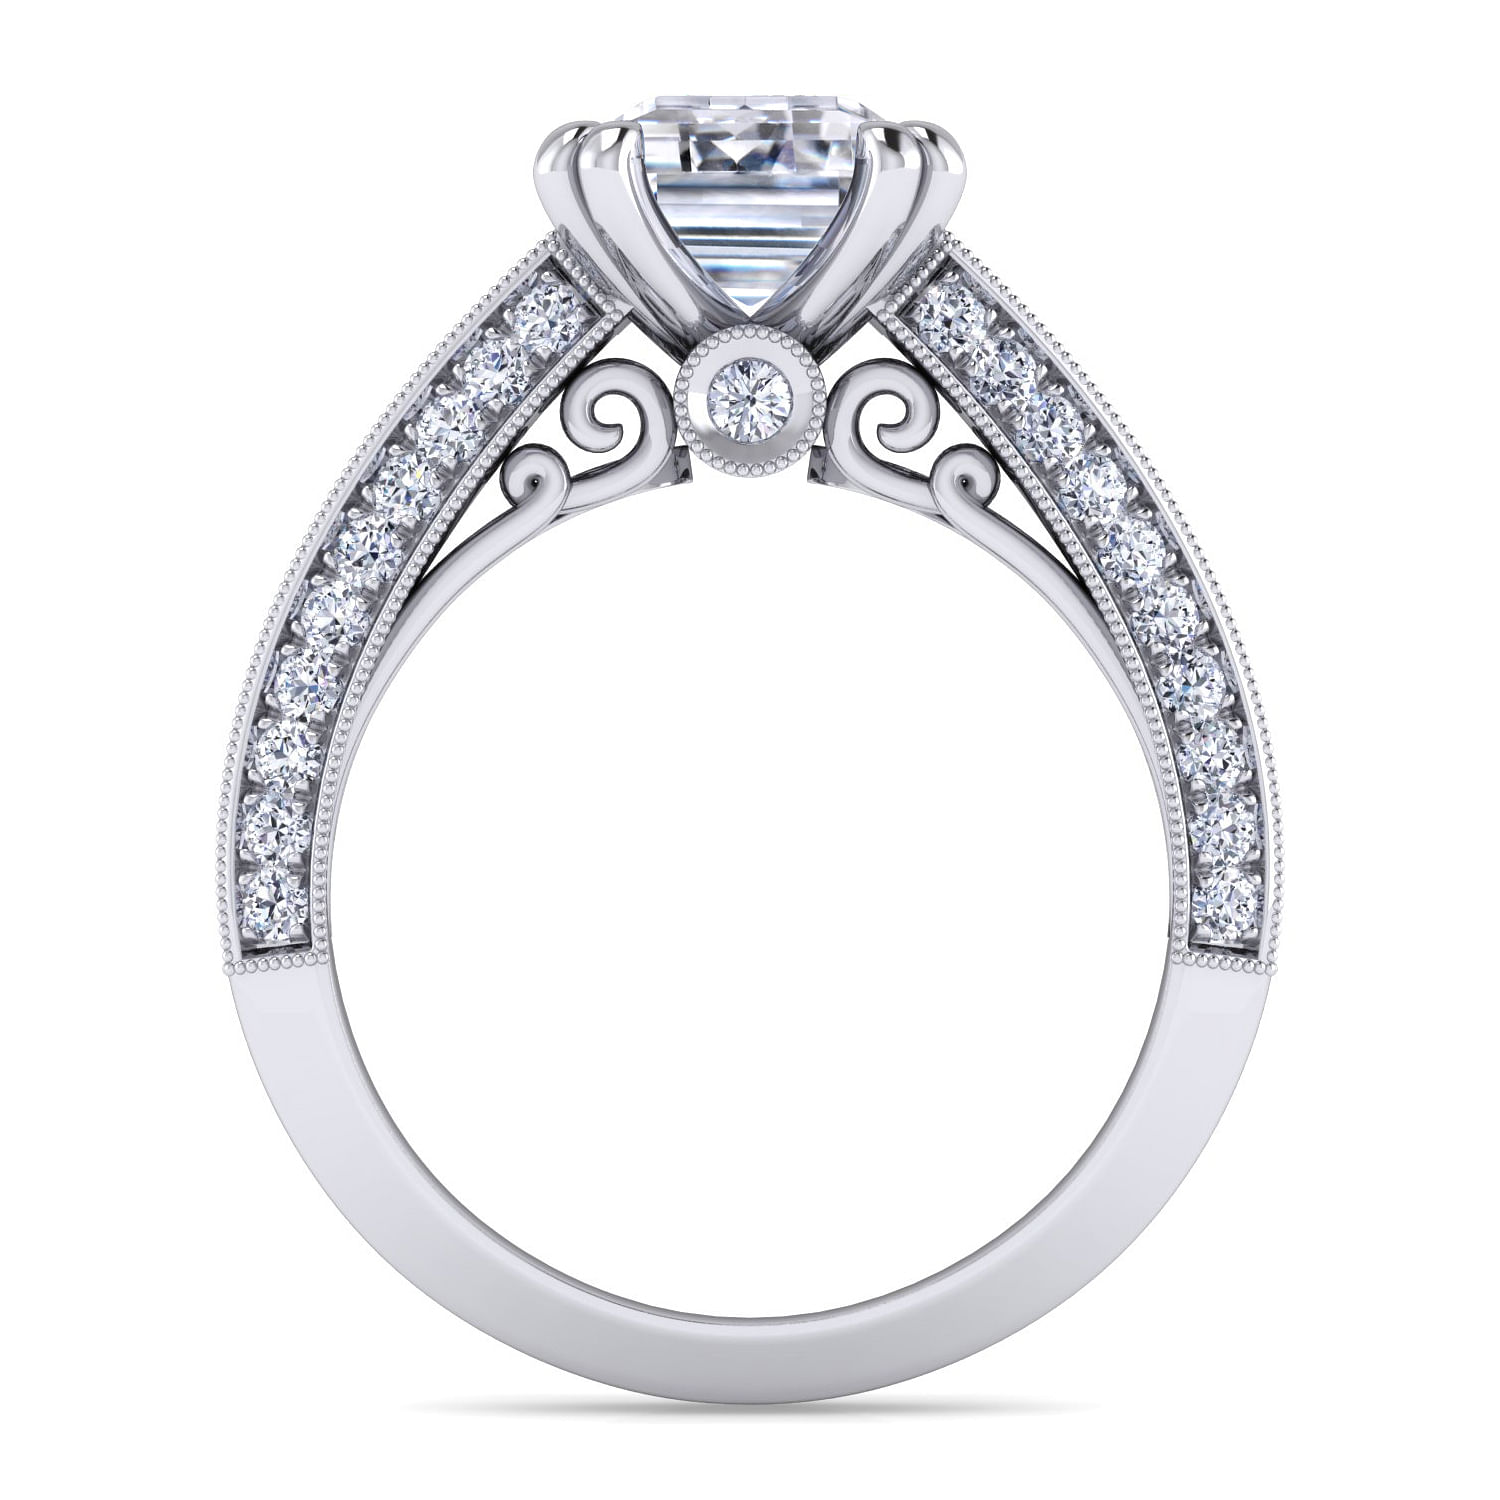 Rebecca - Vintage Inspired 14K White Gold Emerald Cut Wide Band Diamond Channel Set Engagement Ring - 1.28 ct - Shot 2